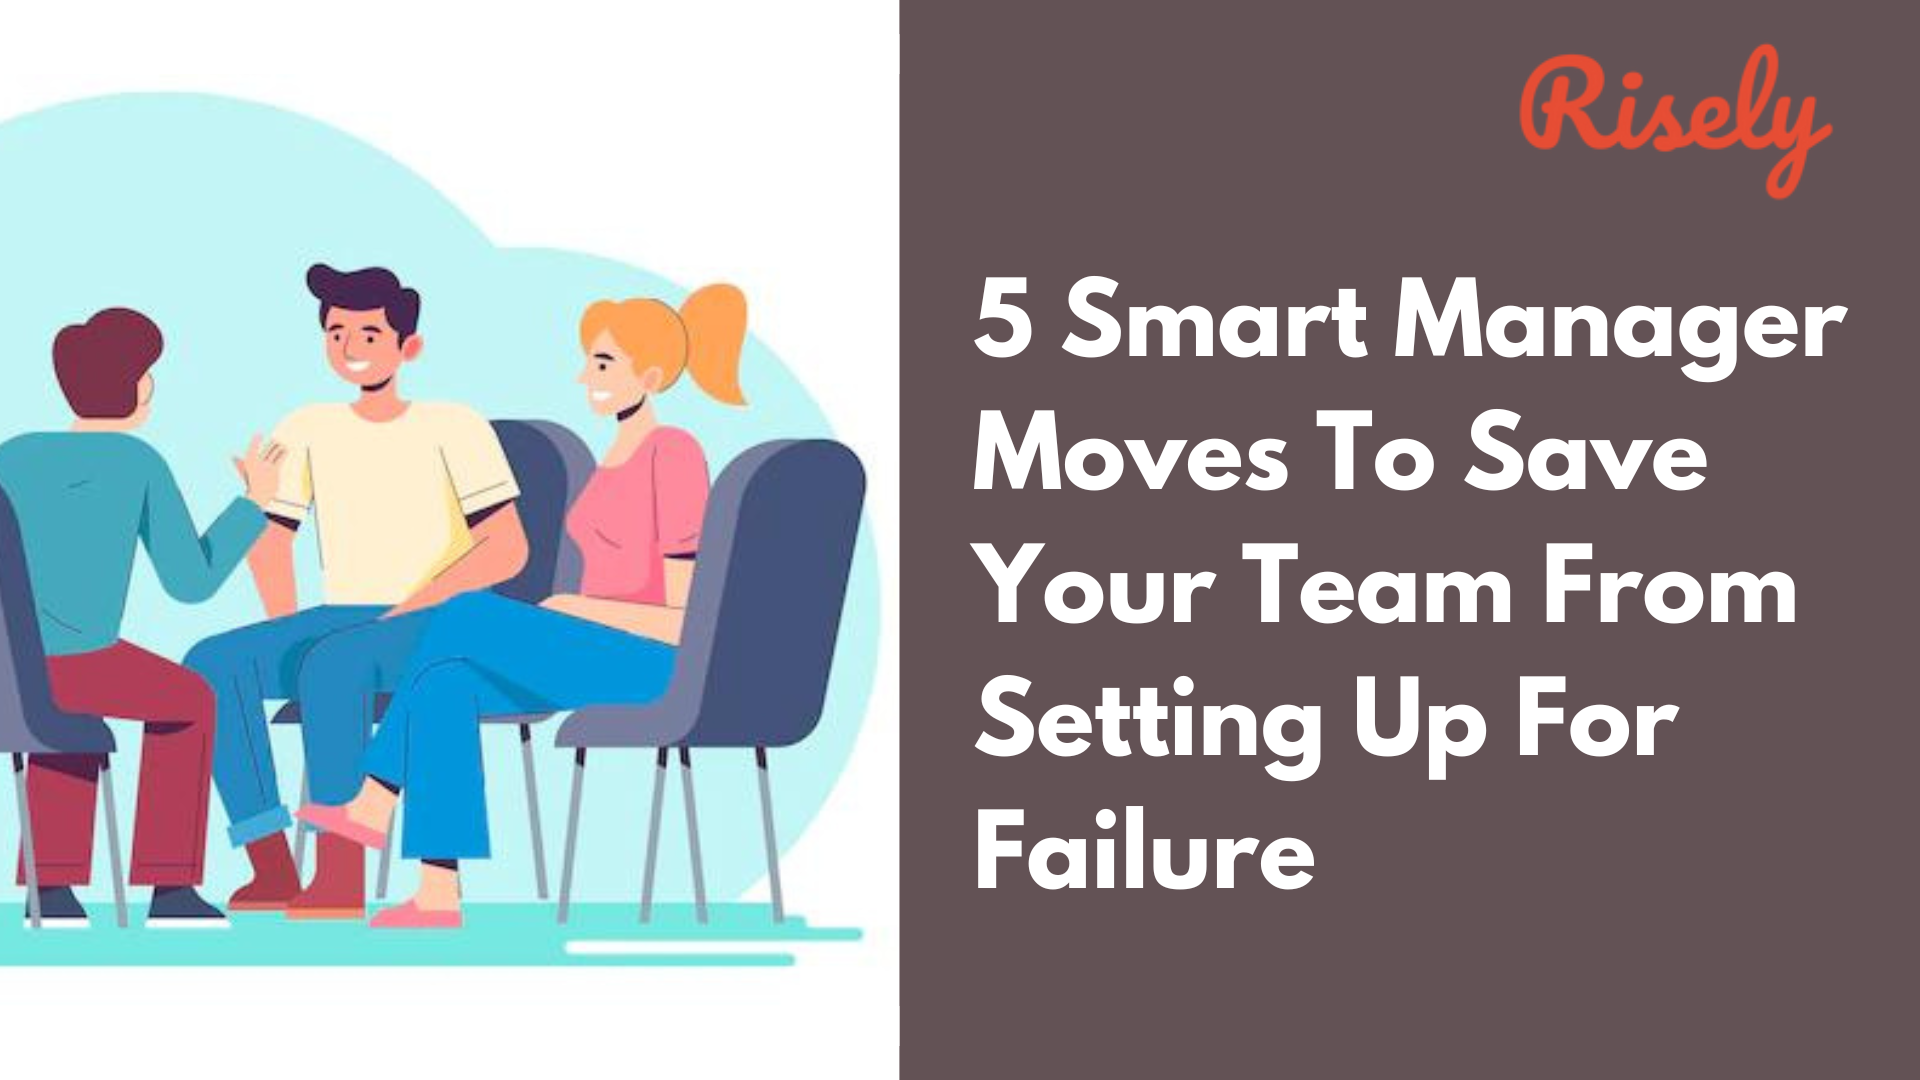 5 Smart Manager Moves To Save Your Team From Setting Up For Failure